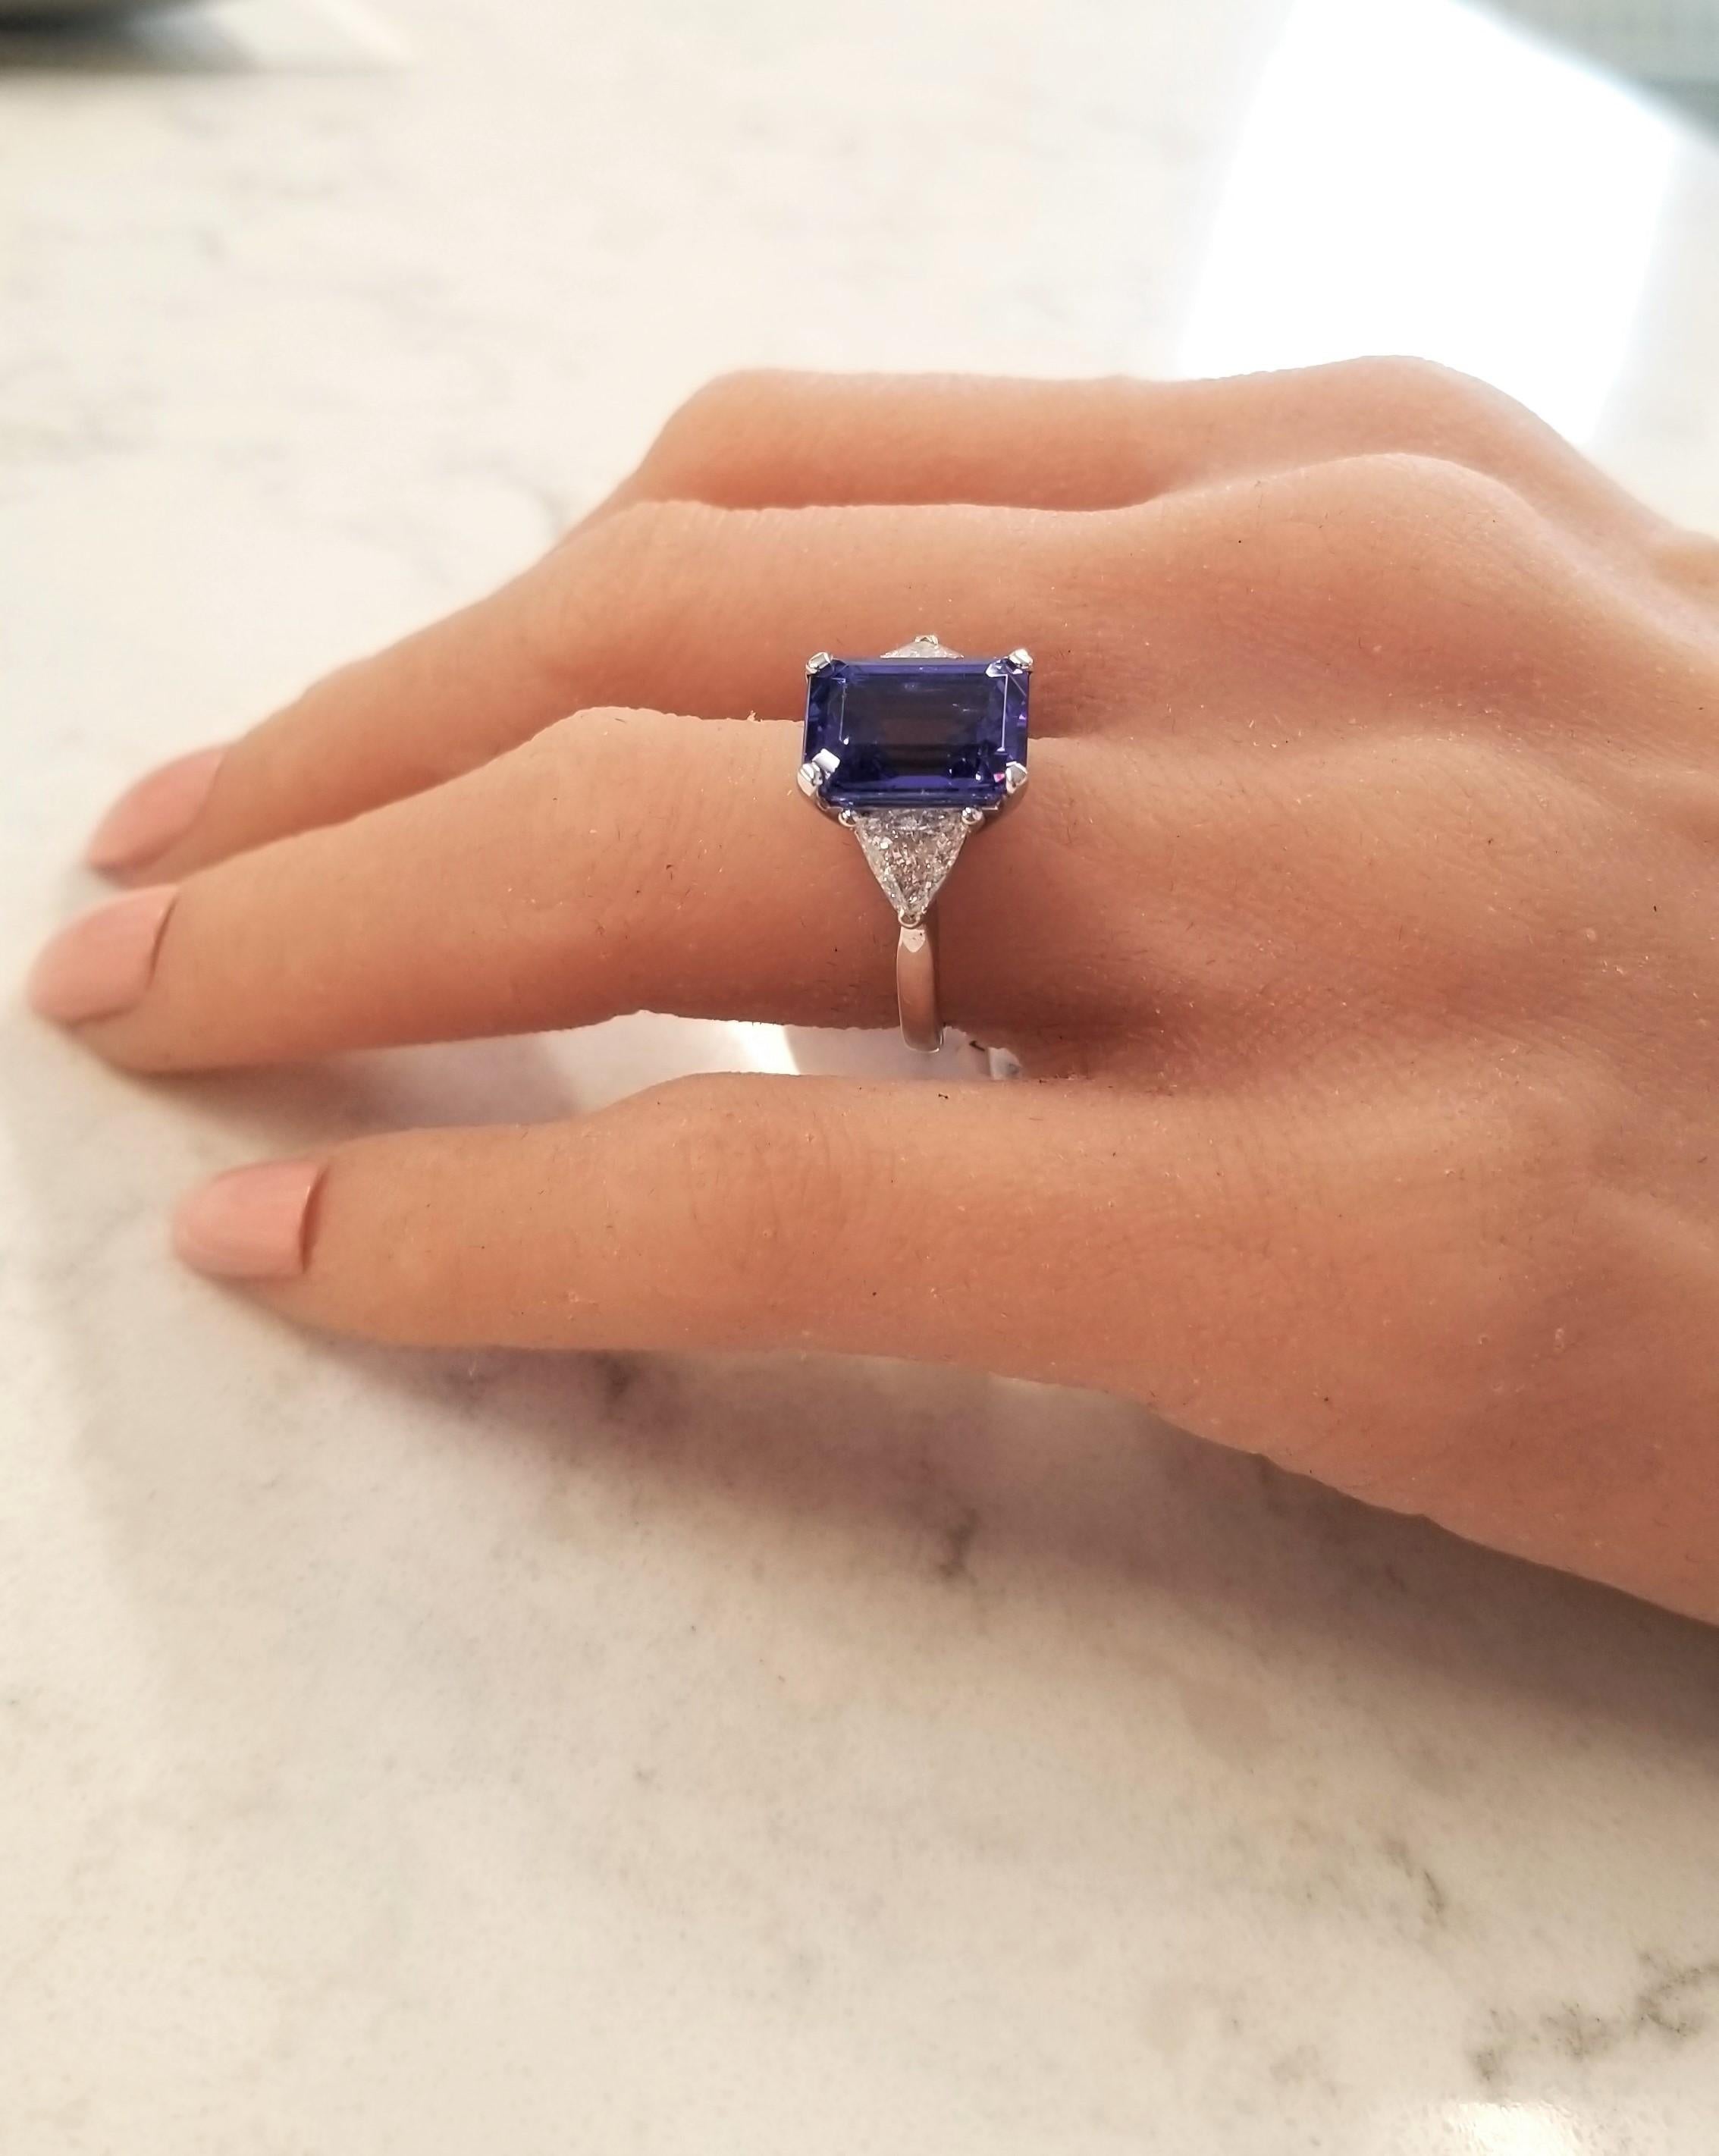 A ravishing deep violet-blue tanzanite weighing 6.27carat, emerald cut, measuring 12.10 x 9.06 mm is the eye catching highlight of this ring. The foothills near Mt. Kilimanjaro in Tanzania produce gems with this most sought-after clarity and